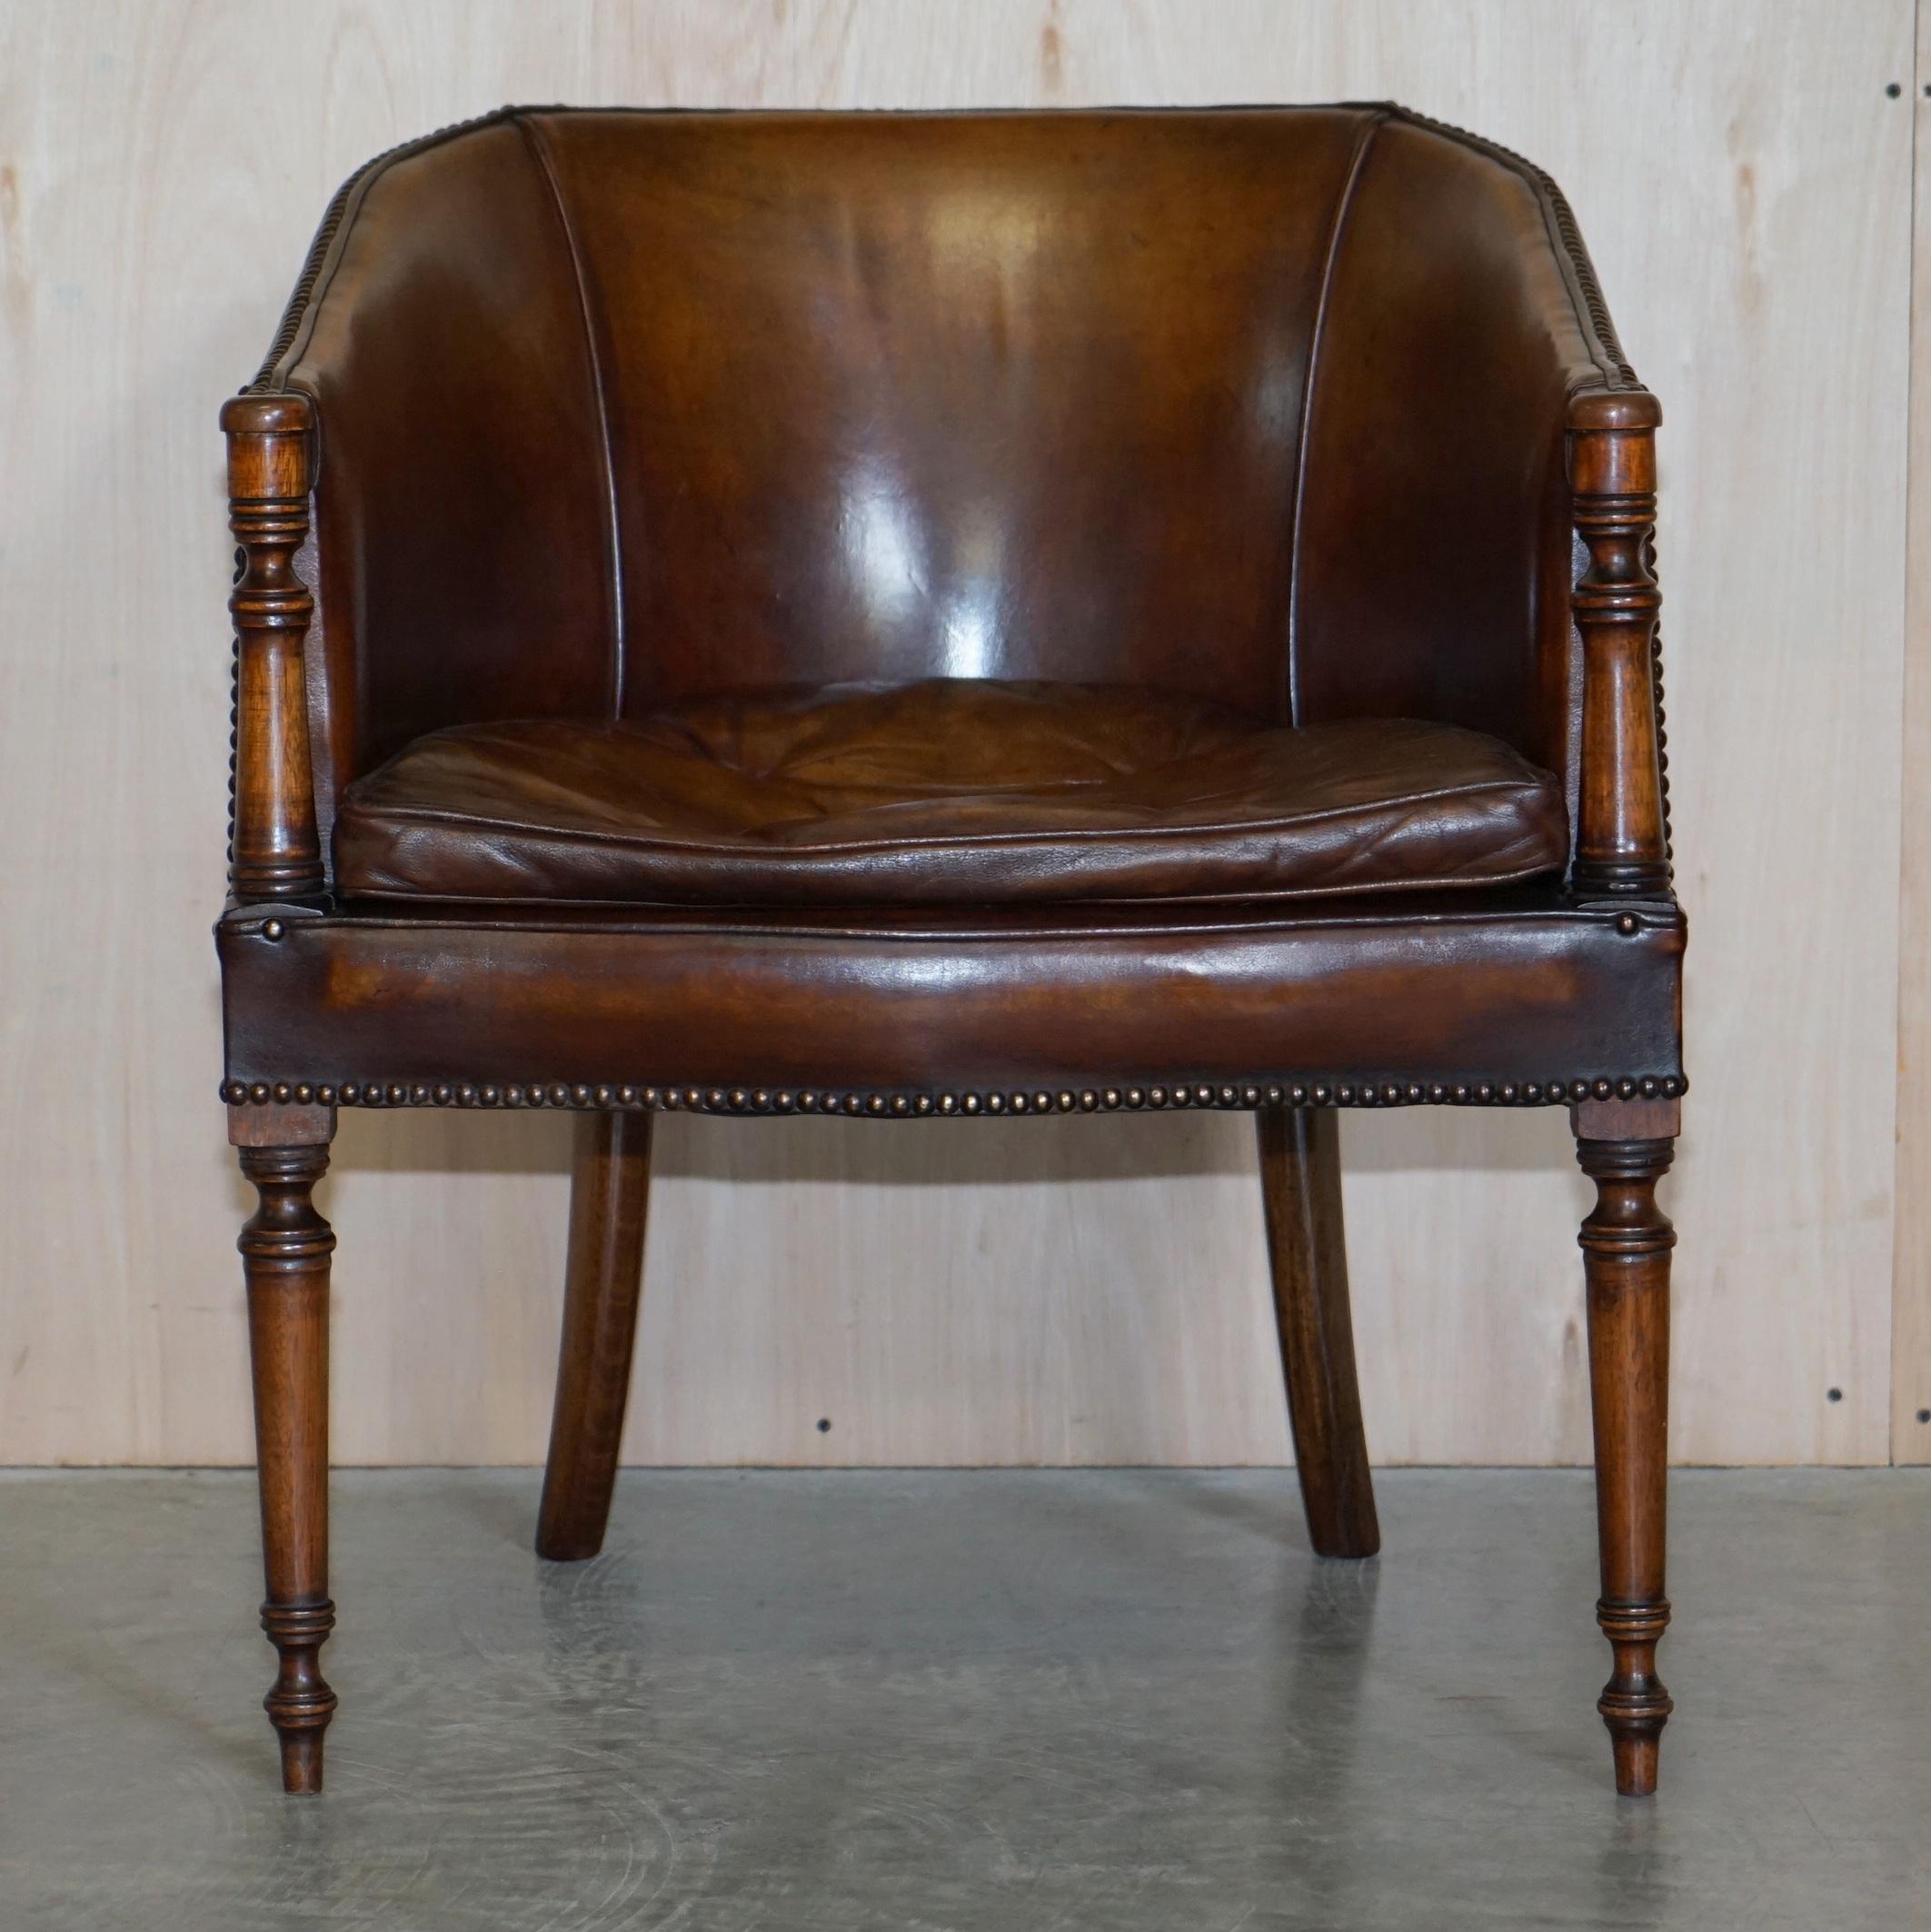 We are delighted to offer for sale this lovely vintage hand dyed brown leather tub armchair with Thomas Chippendale style floating buttons to the cushion

This piece is very decorative, the legs and arm panels are beautifully carved and nicely